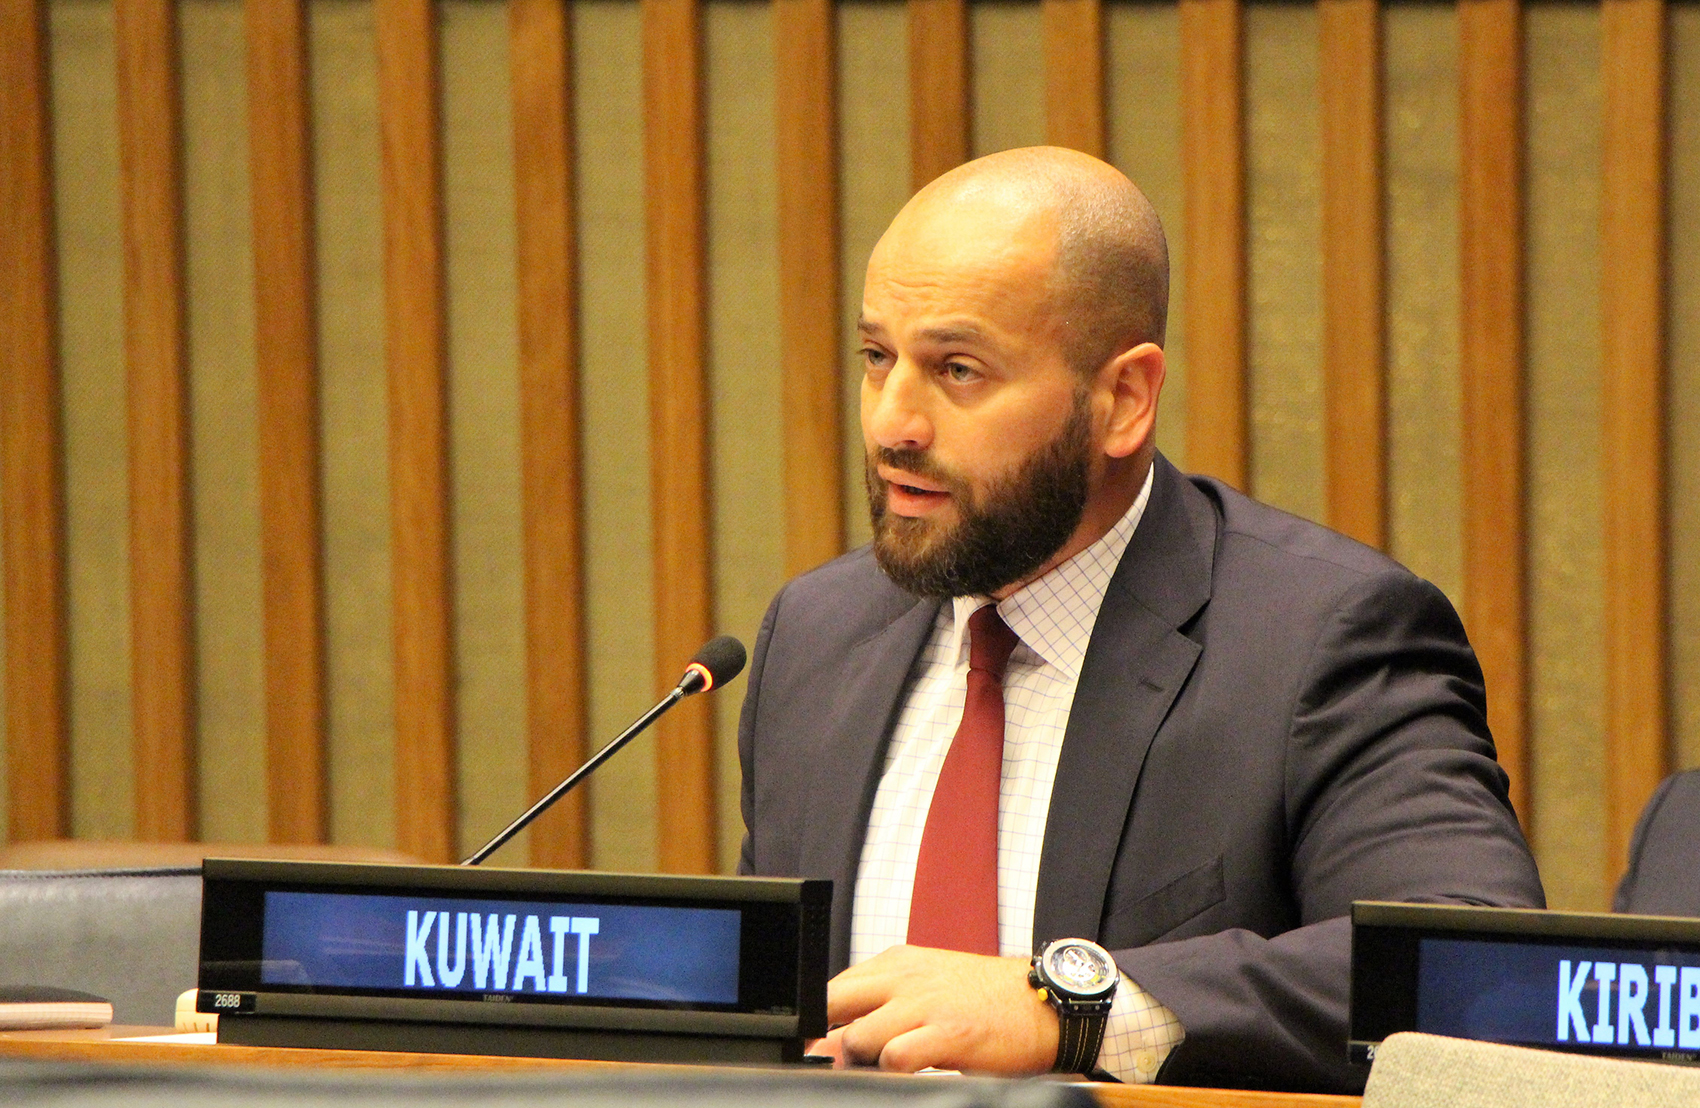 1st Secretary Bashar Al-Duwaisan addresses the 4th Committee of the UN GA during discussion of a "Report of the Special Committee to Investigate Israeli Practices Affecting the Human Rights of the Palestinian People and Other Arabs of the Occupied Te